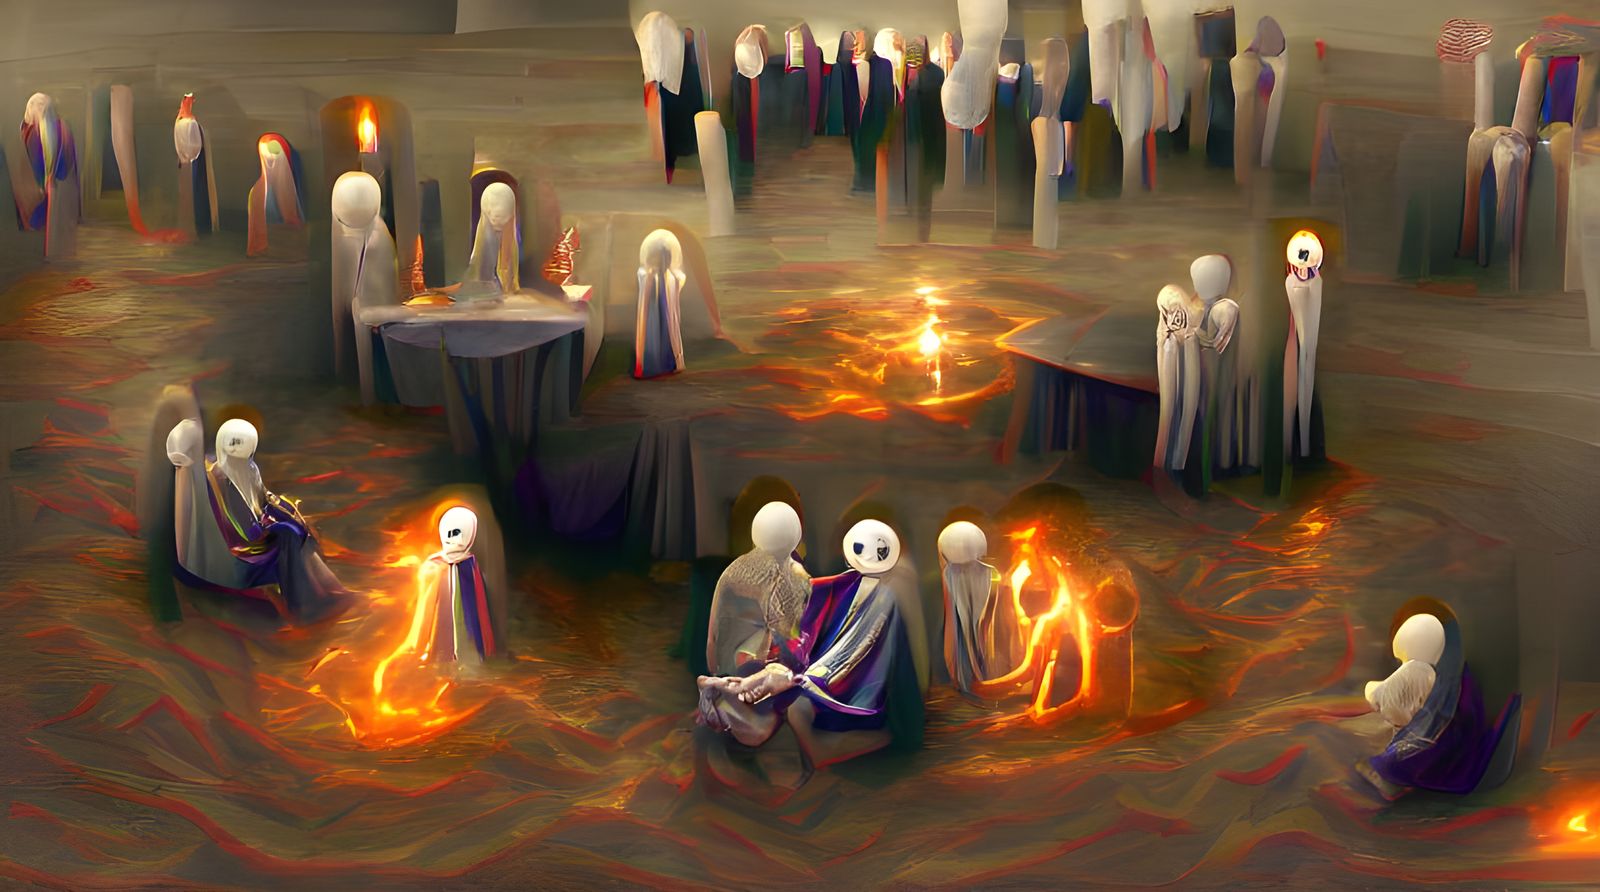 Meeting of the souls 